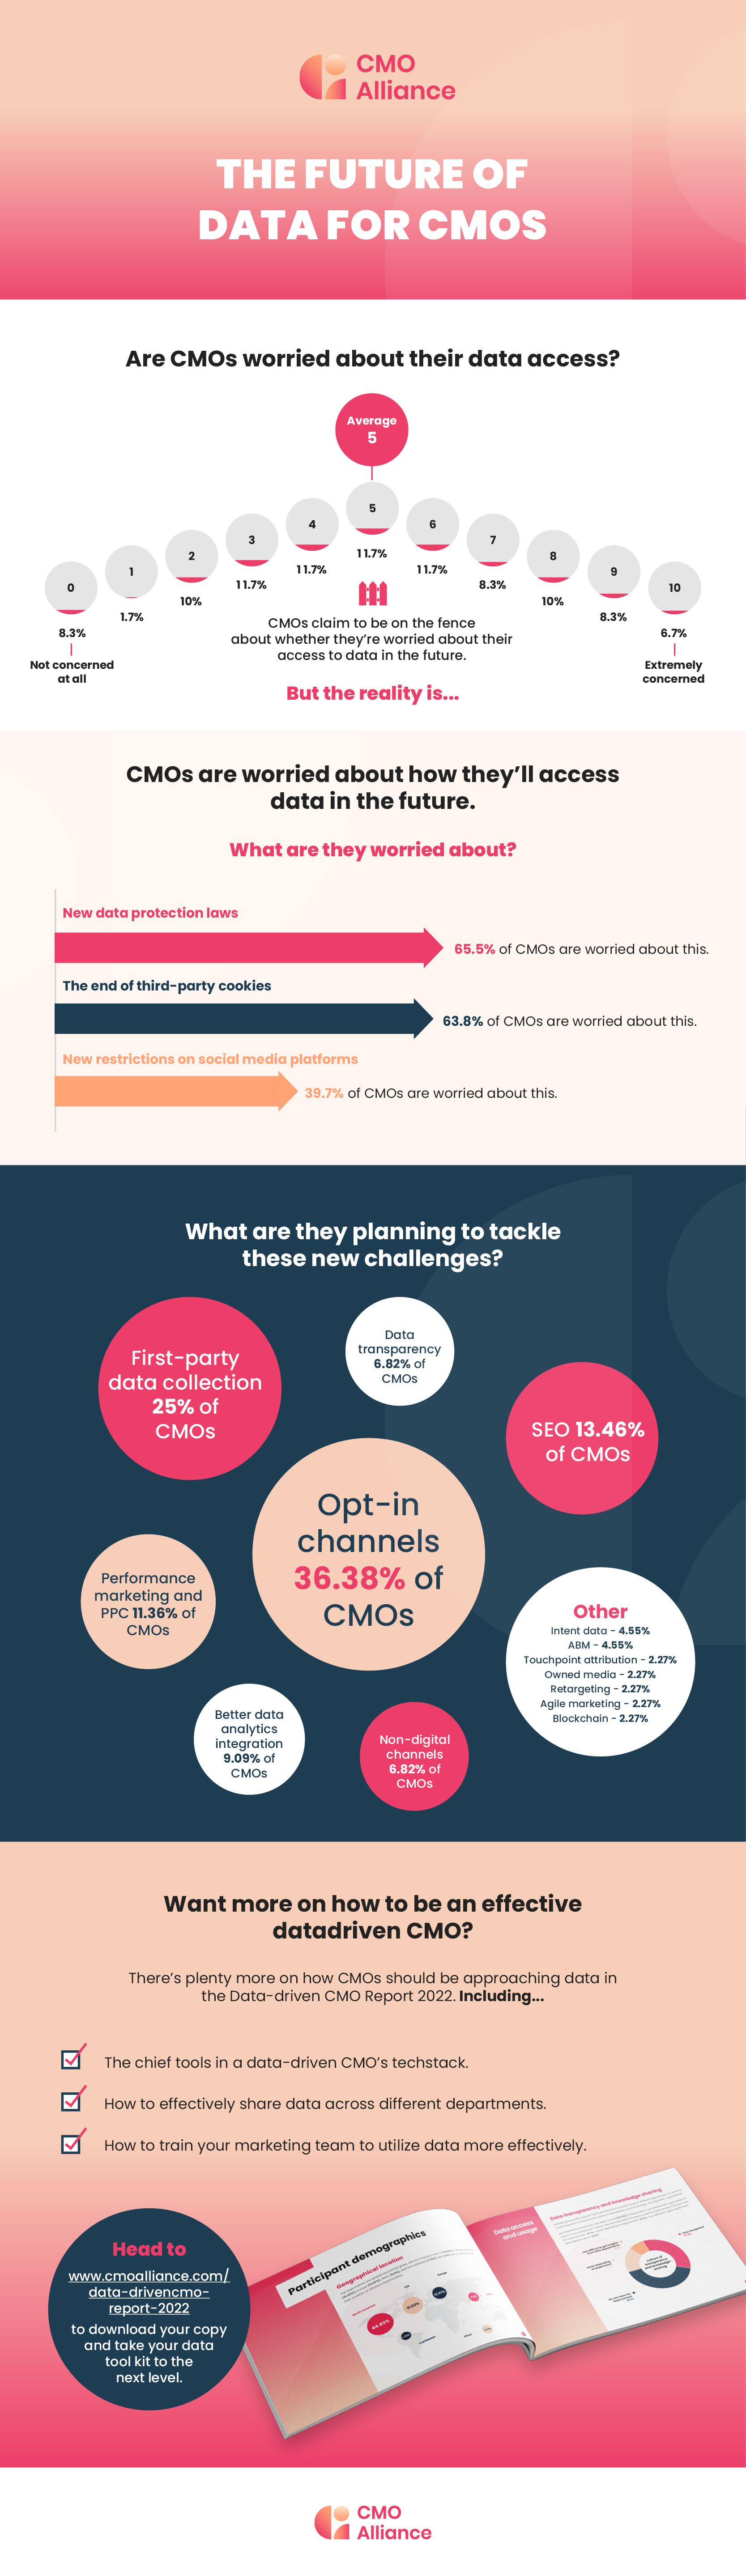 Infographic on the future of data access for CMOs